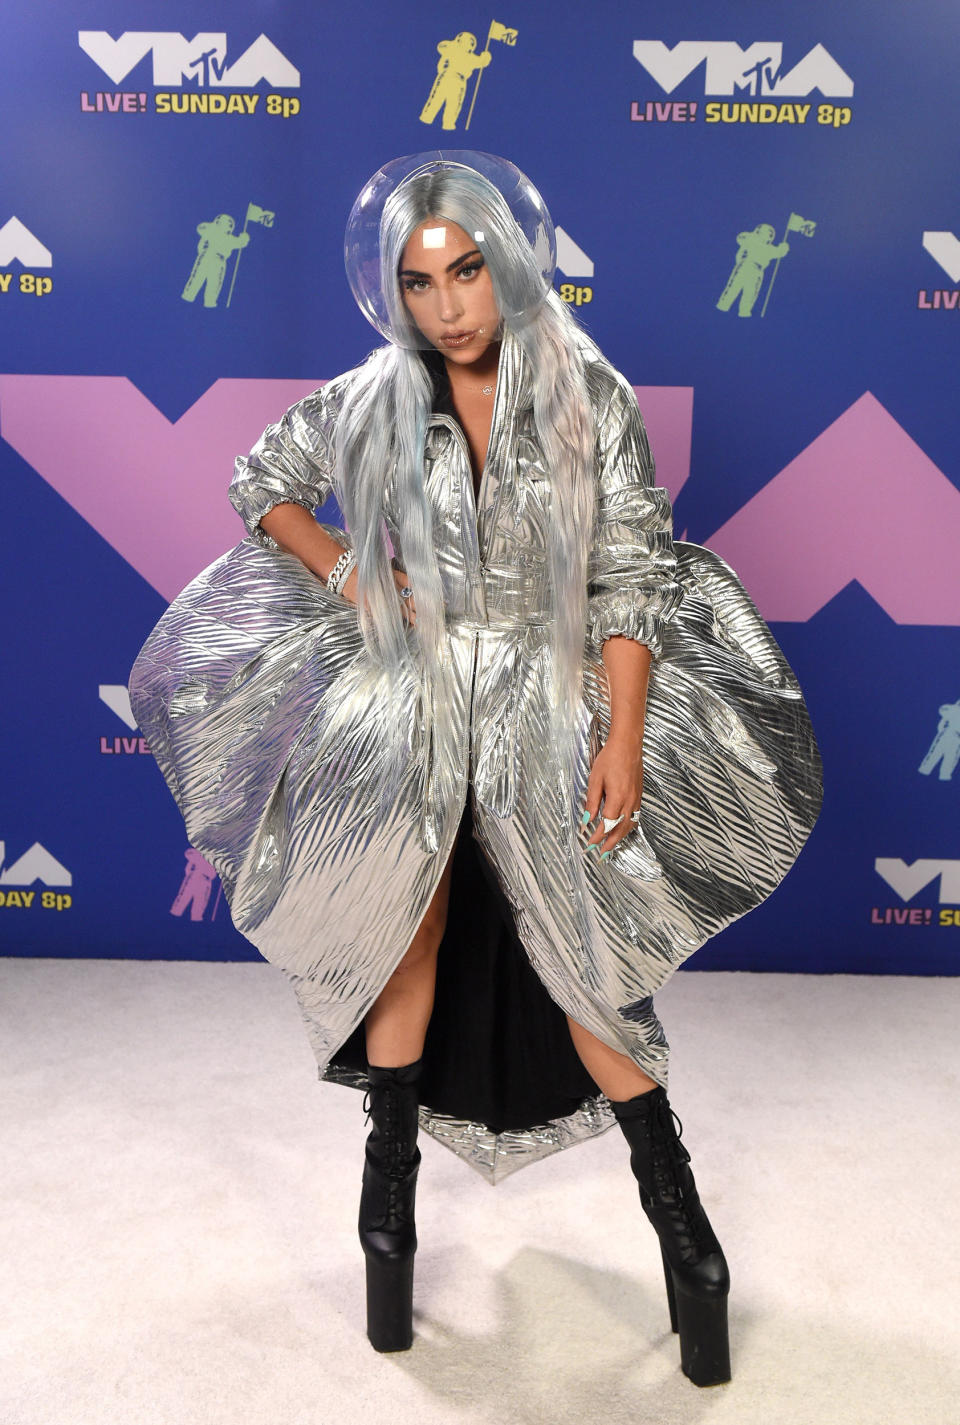 2020 MTV Video Music Awards - Arrivals (Kevin Winter / Getty Images for MTV)